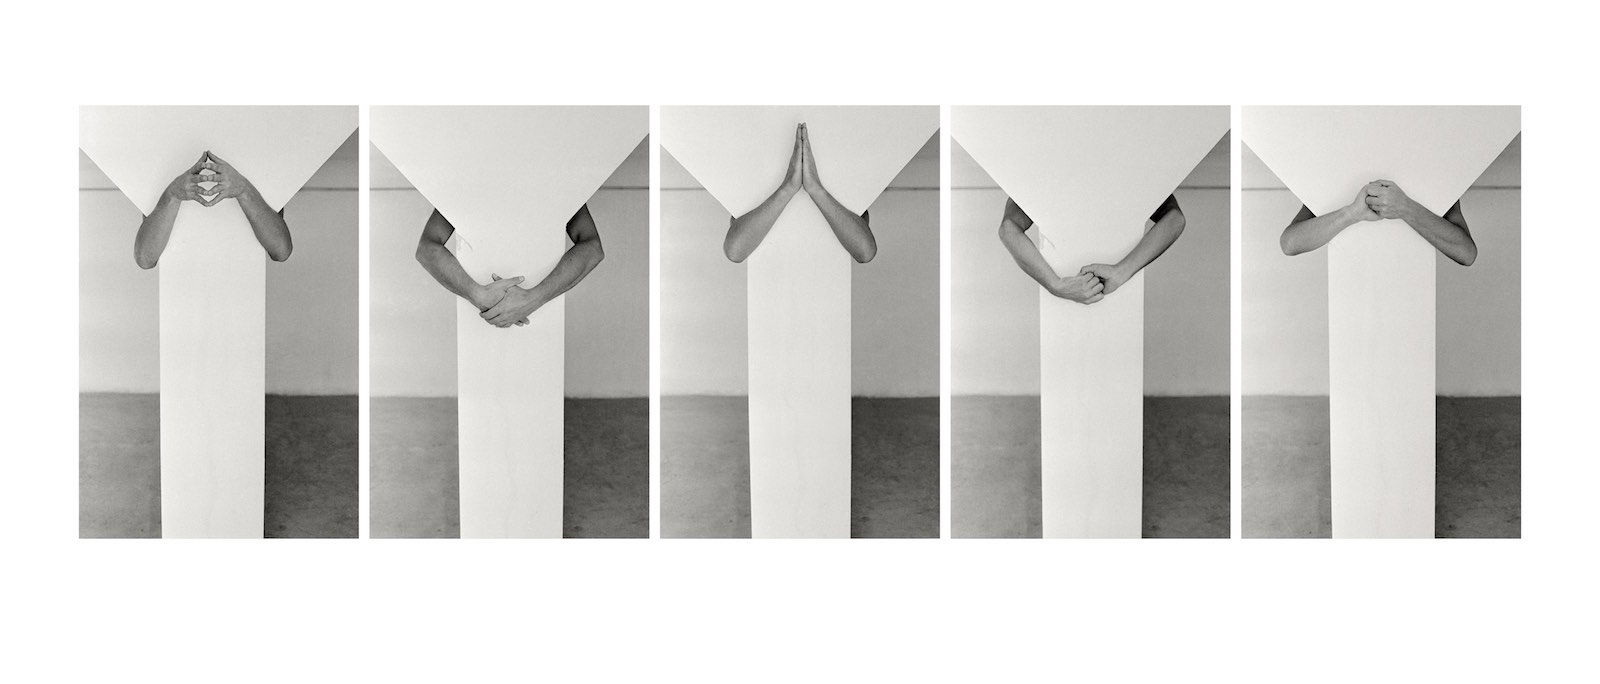 Signs (body work), 1974